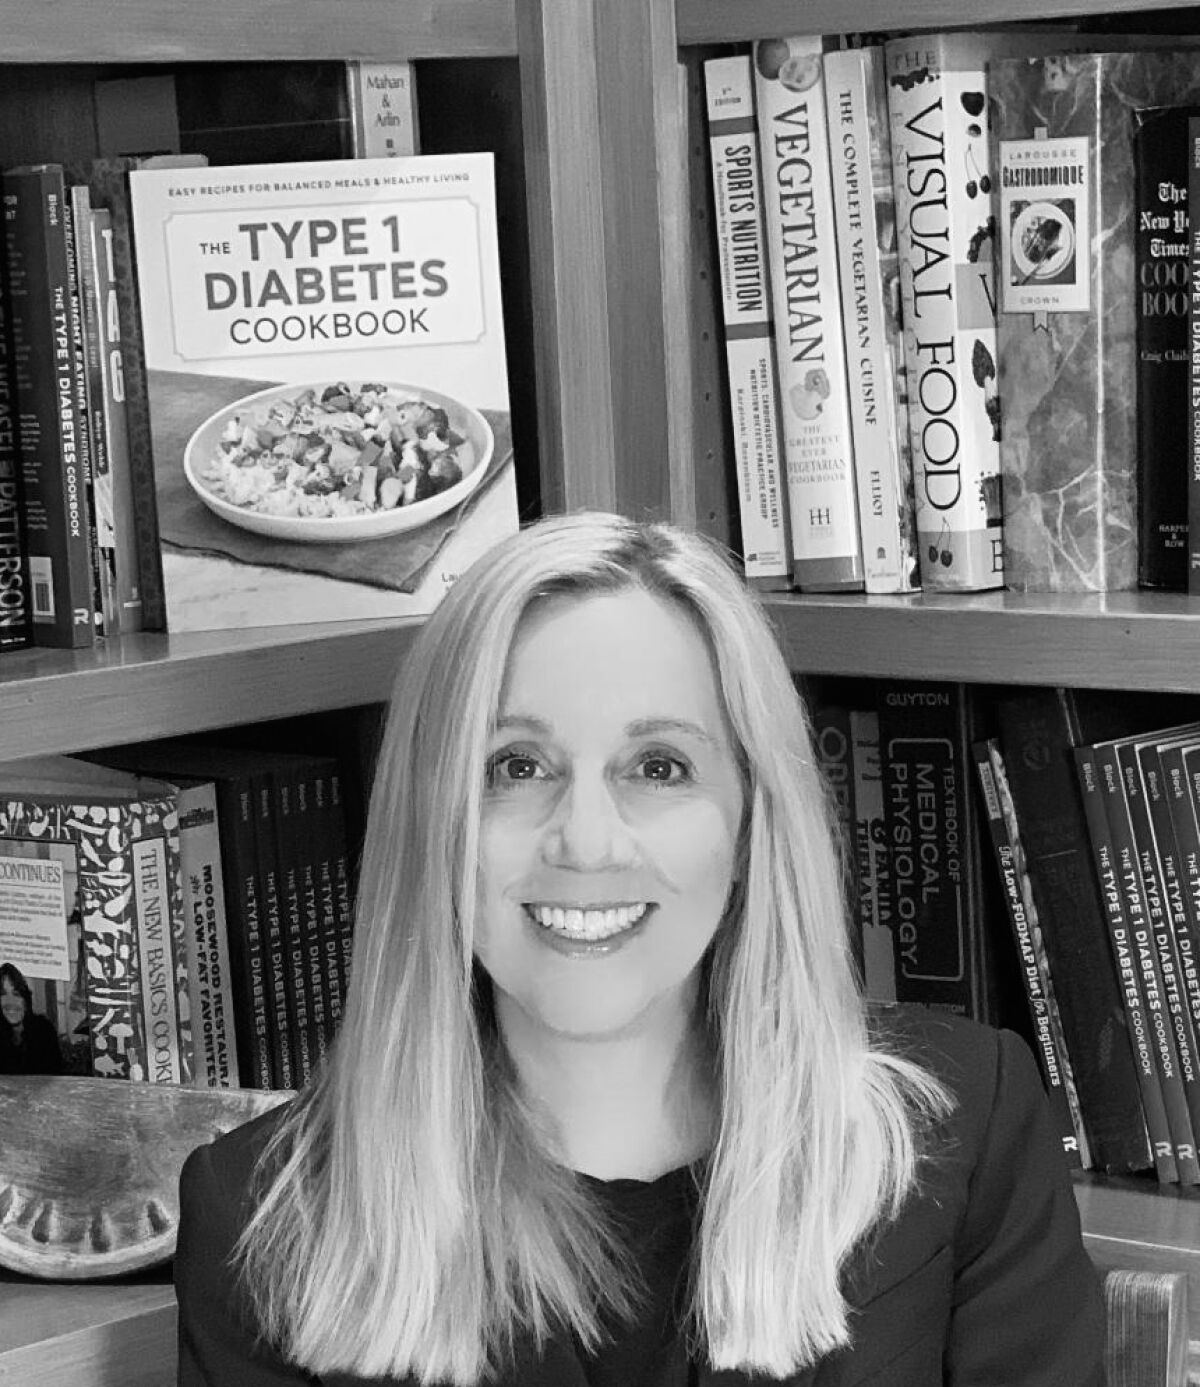 Laurie Block, author of ‘The Type 1 Diabetes Cookbook’